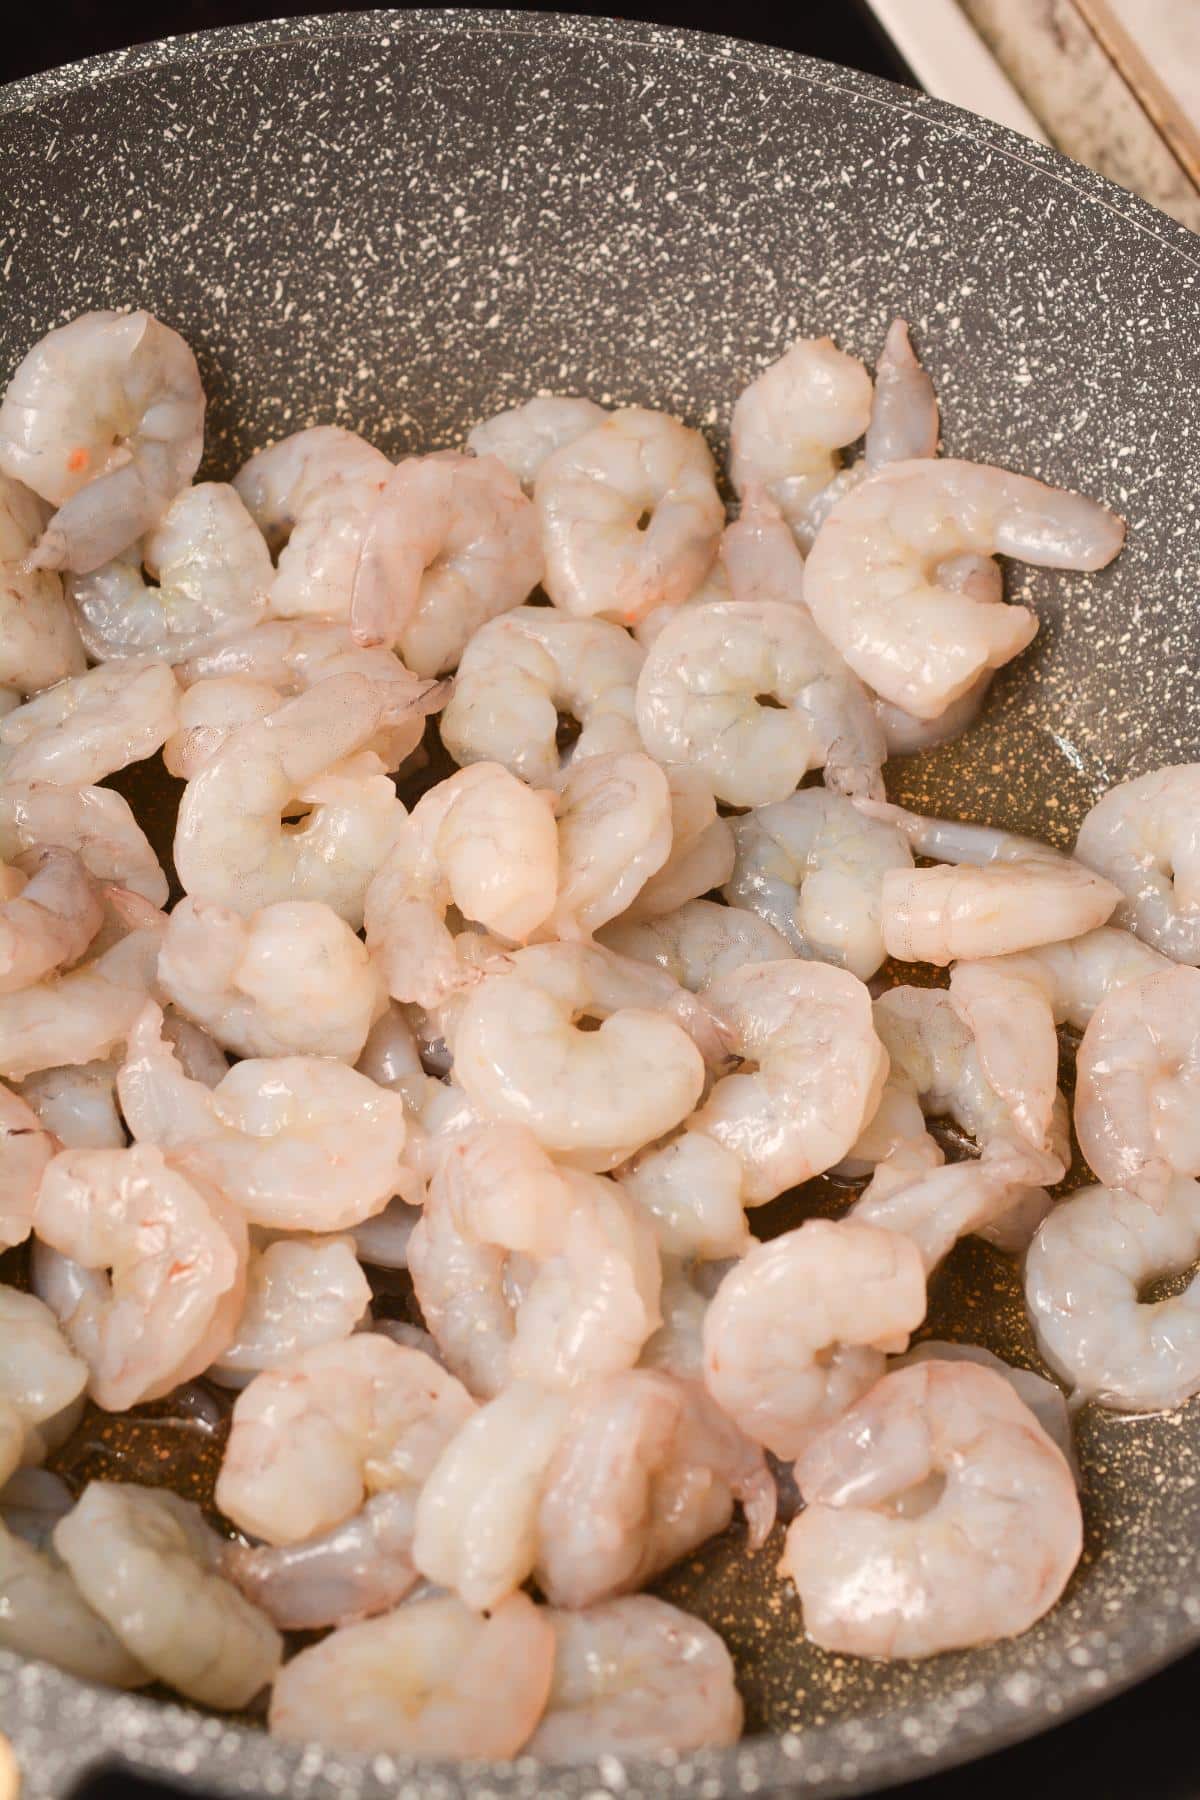 Shrimp being cooked in a frying pan on top of a stove.